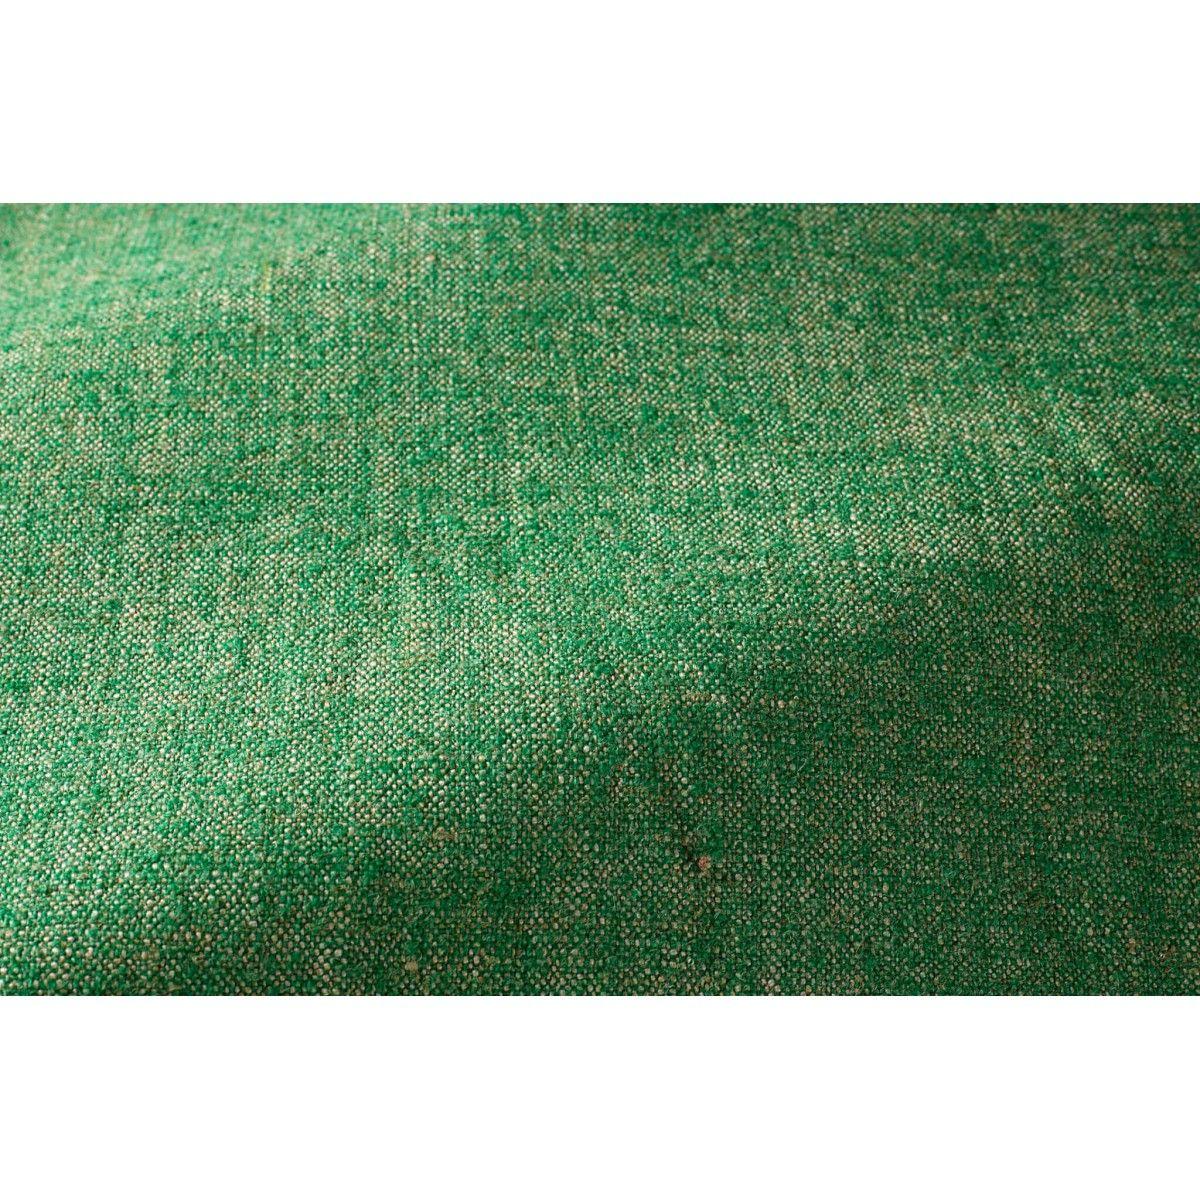 Popus Editions Giovanna 4 Seater Sofa in Emerald London Linen Fabric

Giovanna is a sofa with a strong profile. A sober, plush line, with this famous detail that changes everything, so as not to forget its strength of character and this charming